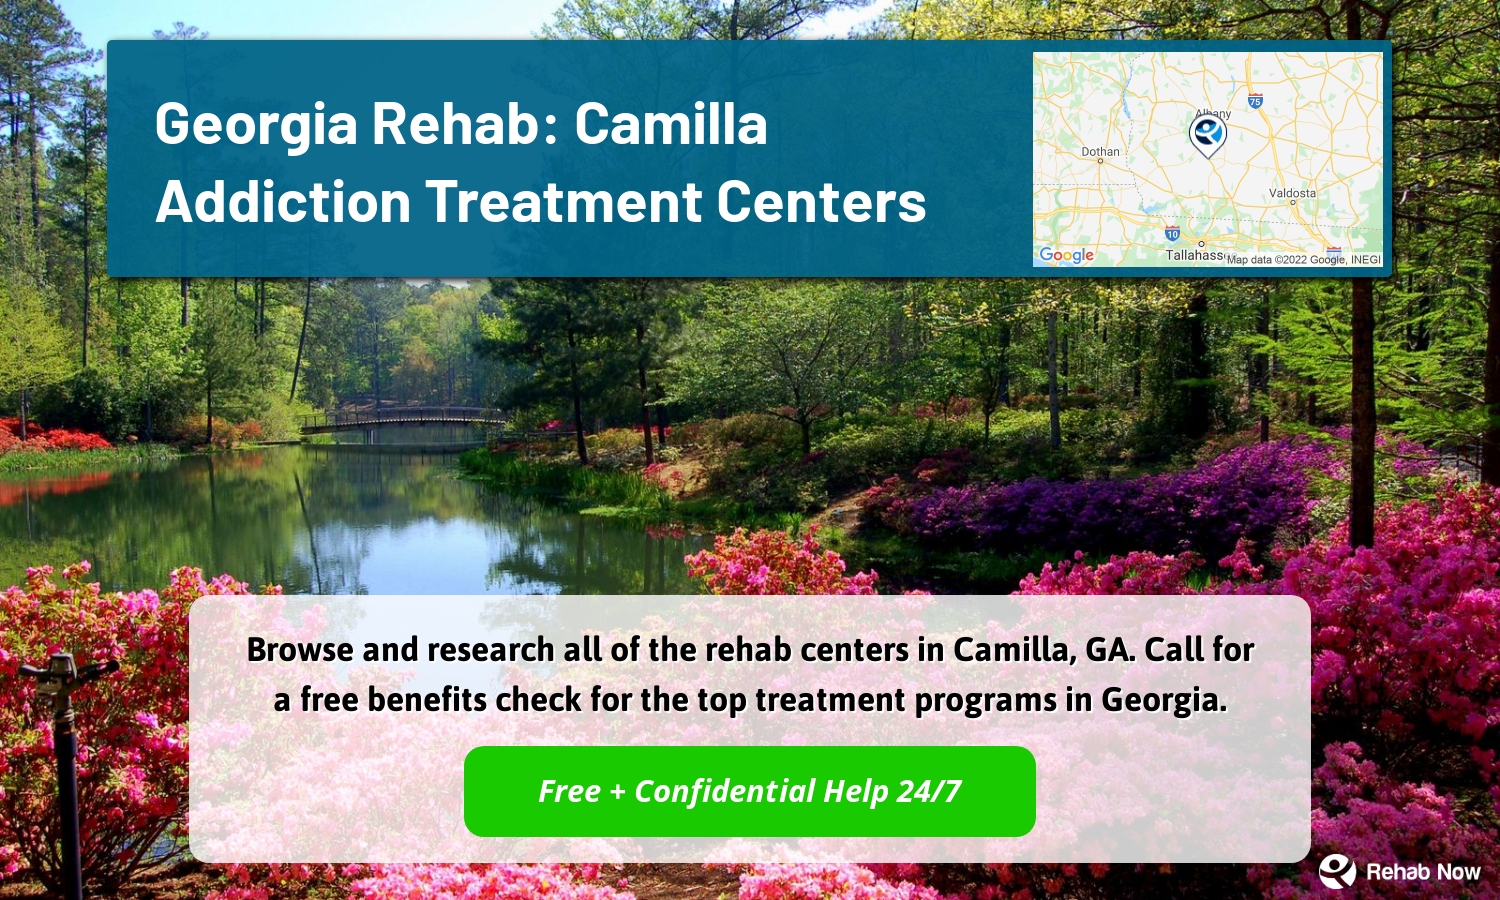 Browse and research all of the rehab centers in Camilla, GA. Call for a free benefits check for the top treatment programs in Georgia.